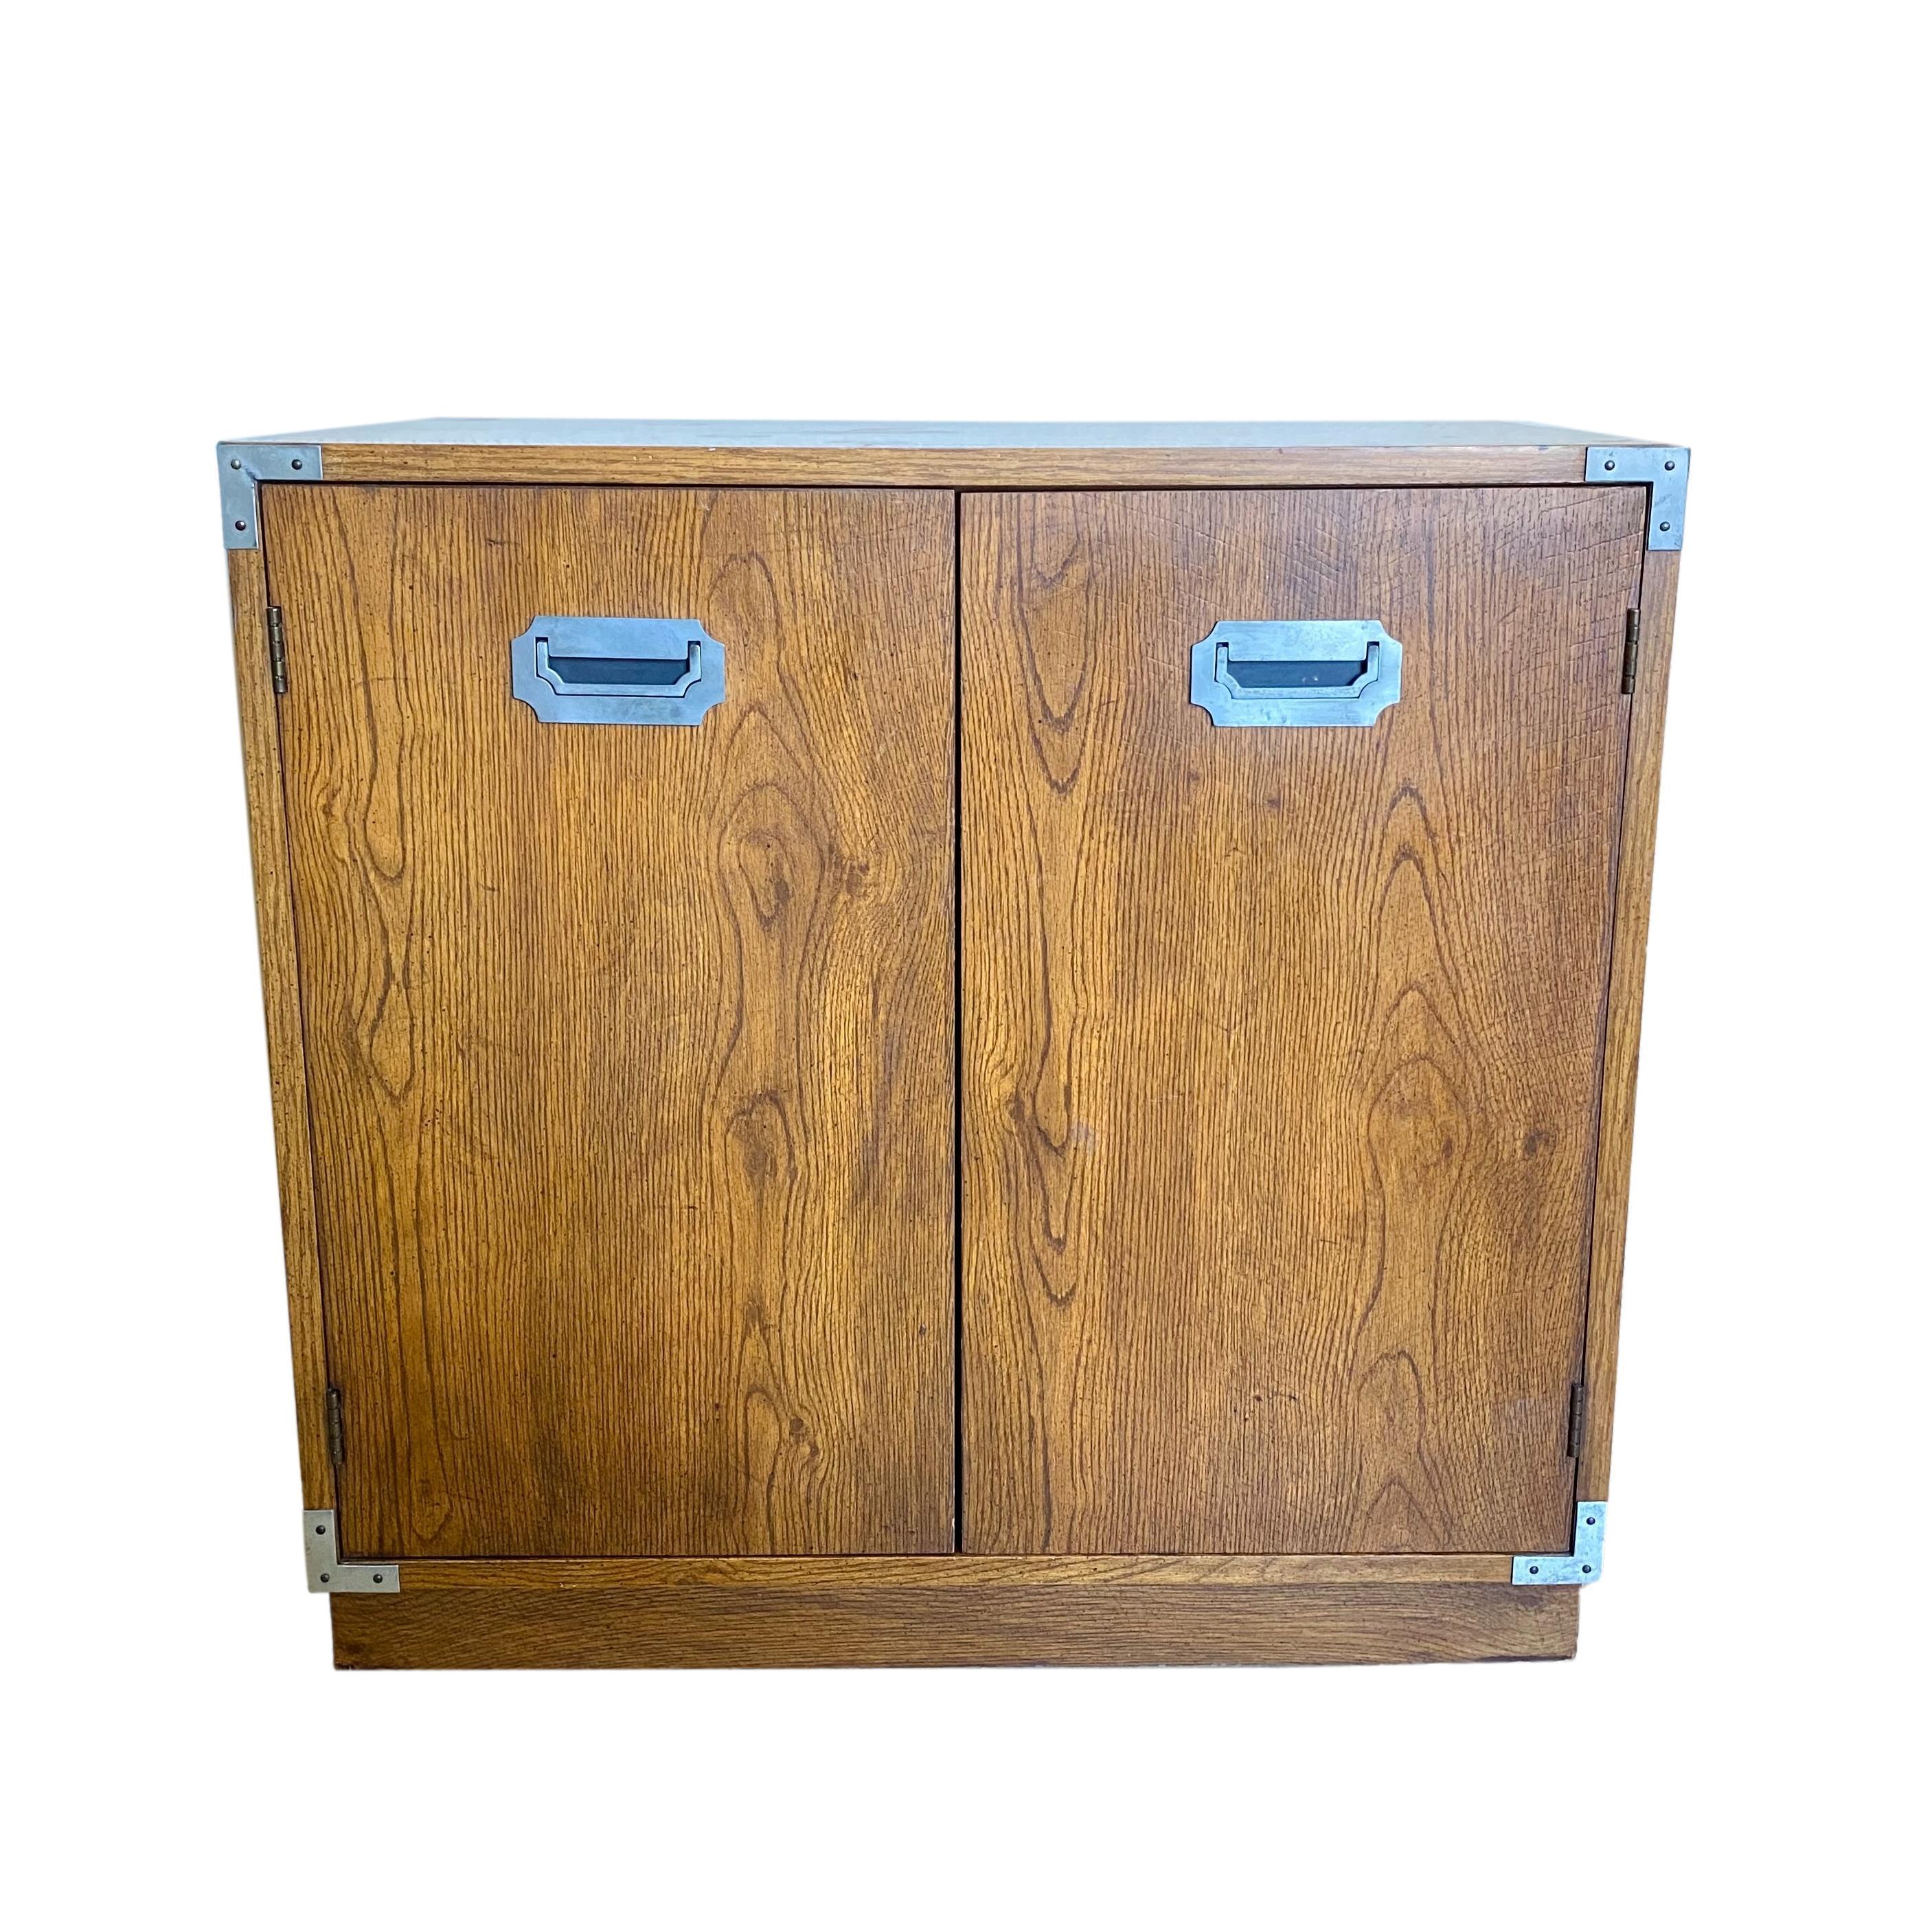 A vintage 1970's campaign style 2-door storage cabinet by Bernhardt. Wood and wood veneer with nickel plated hardware; one removable interior shelf.

Dimensions: 30